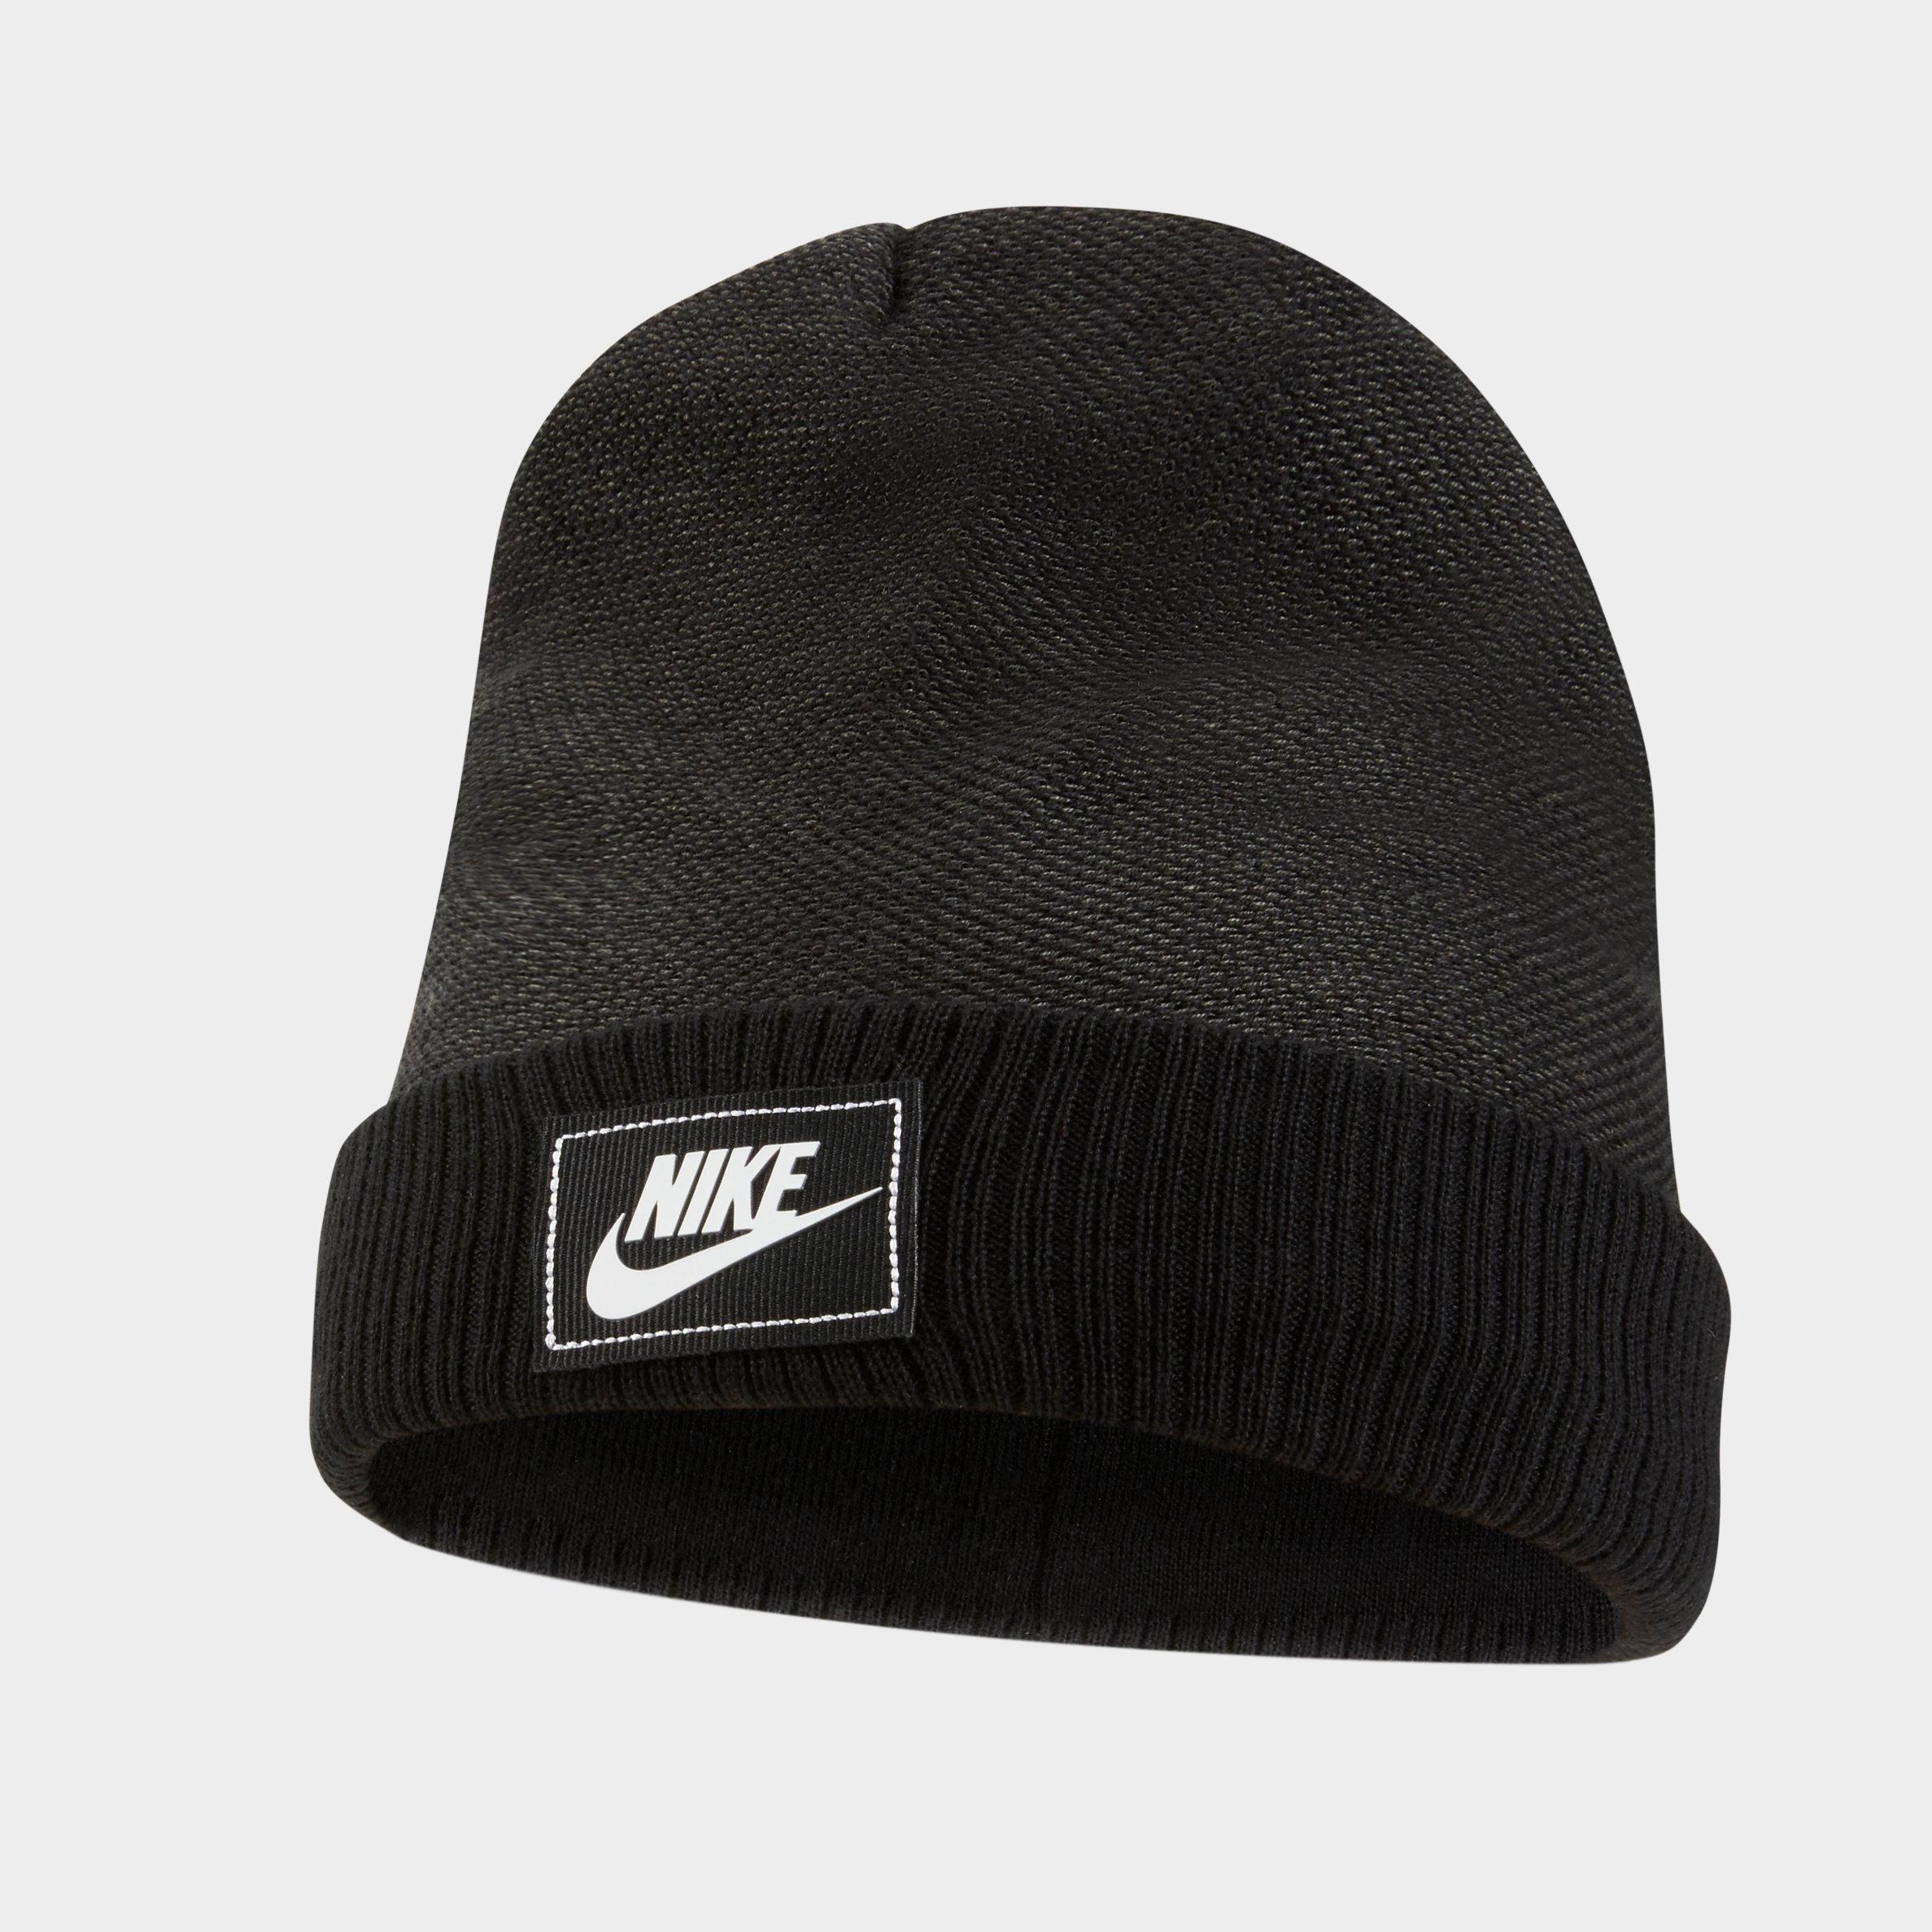 nike wooly hat